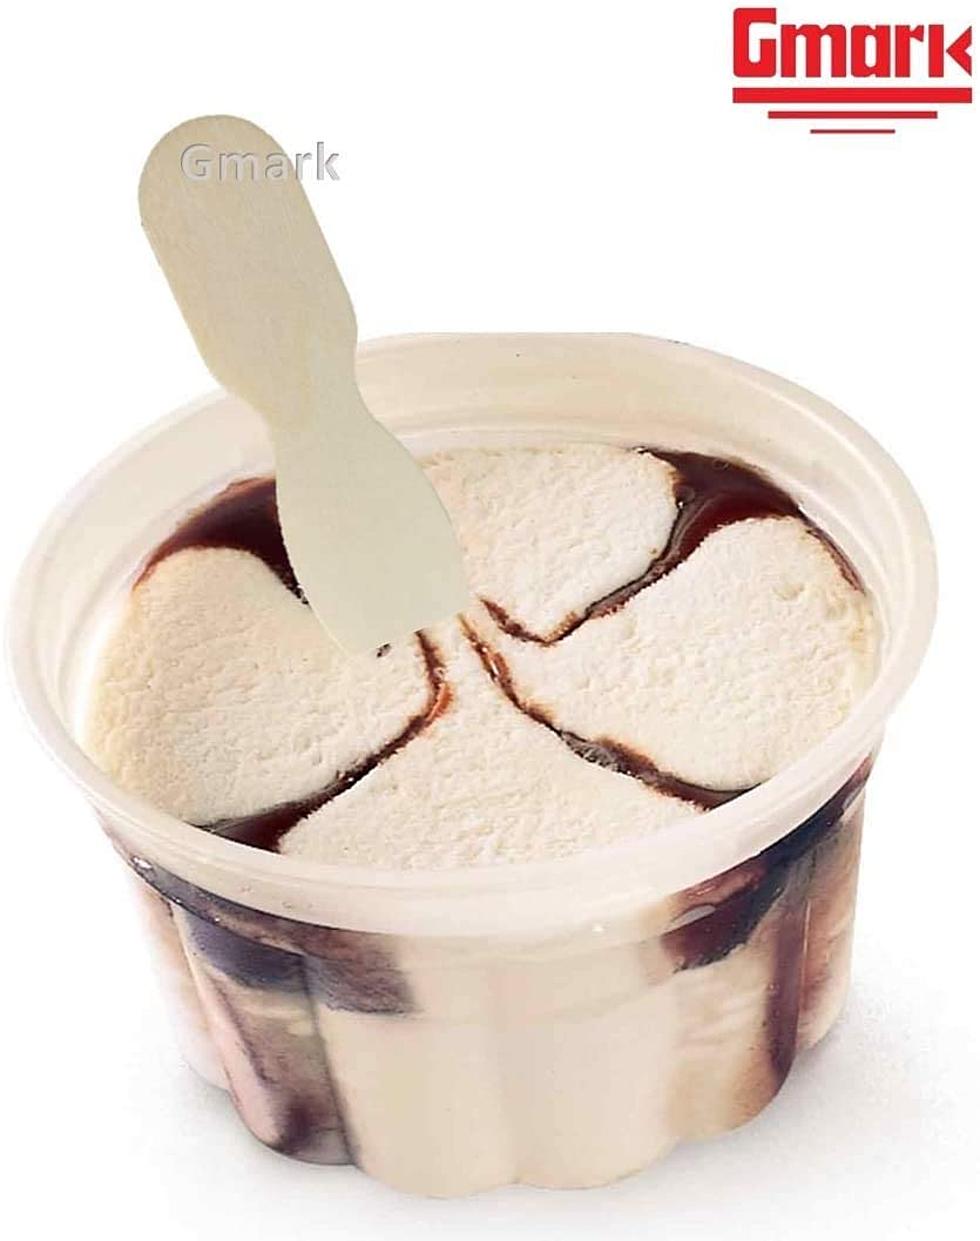 Do You Remember Eating Ice Cream with a Wooden Spoon? You Can Still Buy Them!